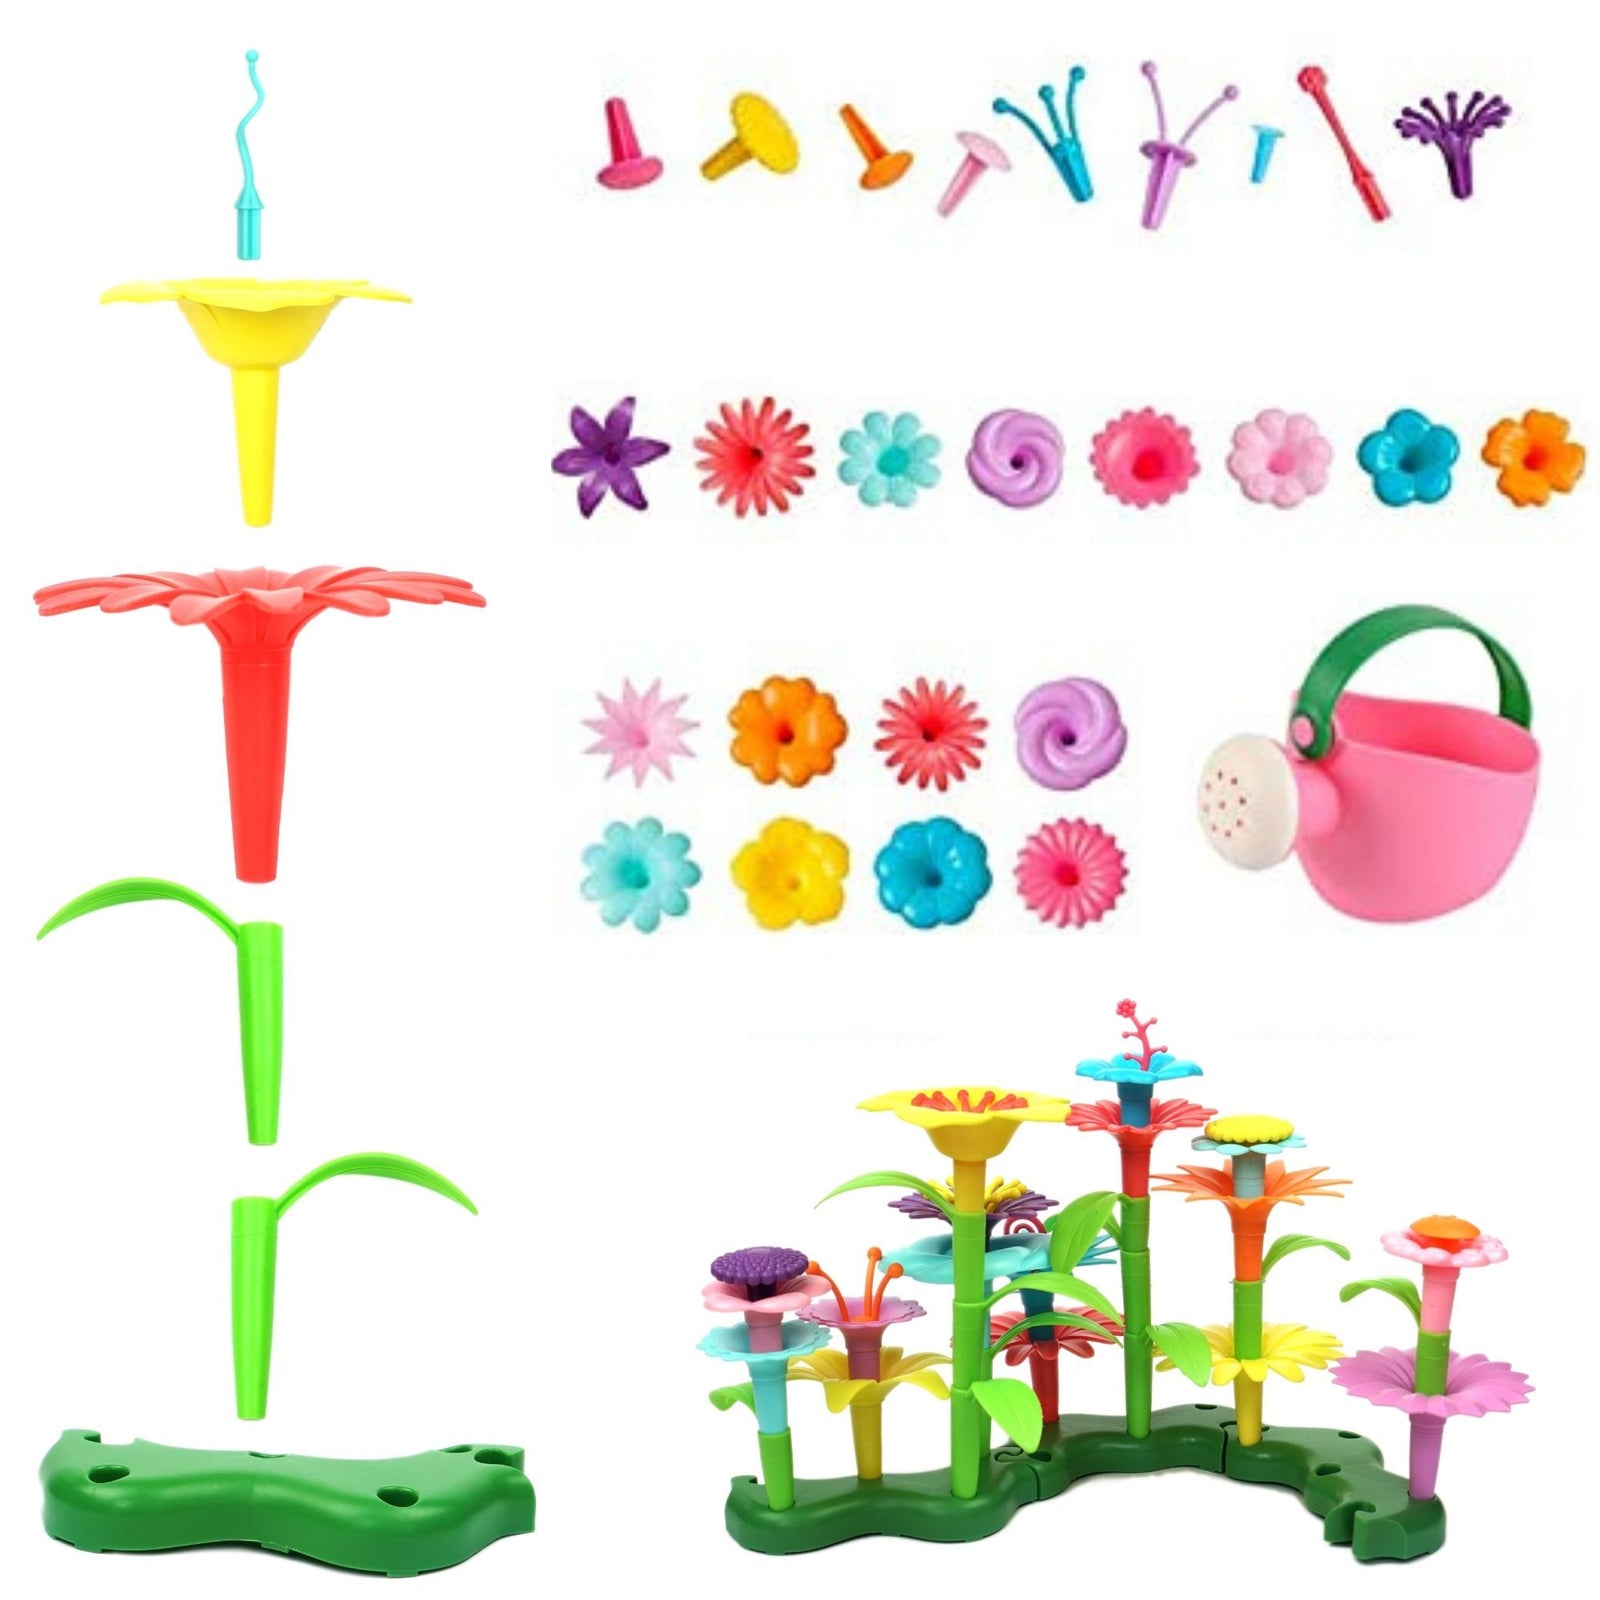 Build A Flower Garden, Colorful Flower Stacking Toy 47 Pcs